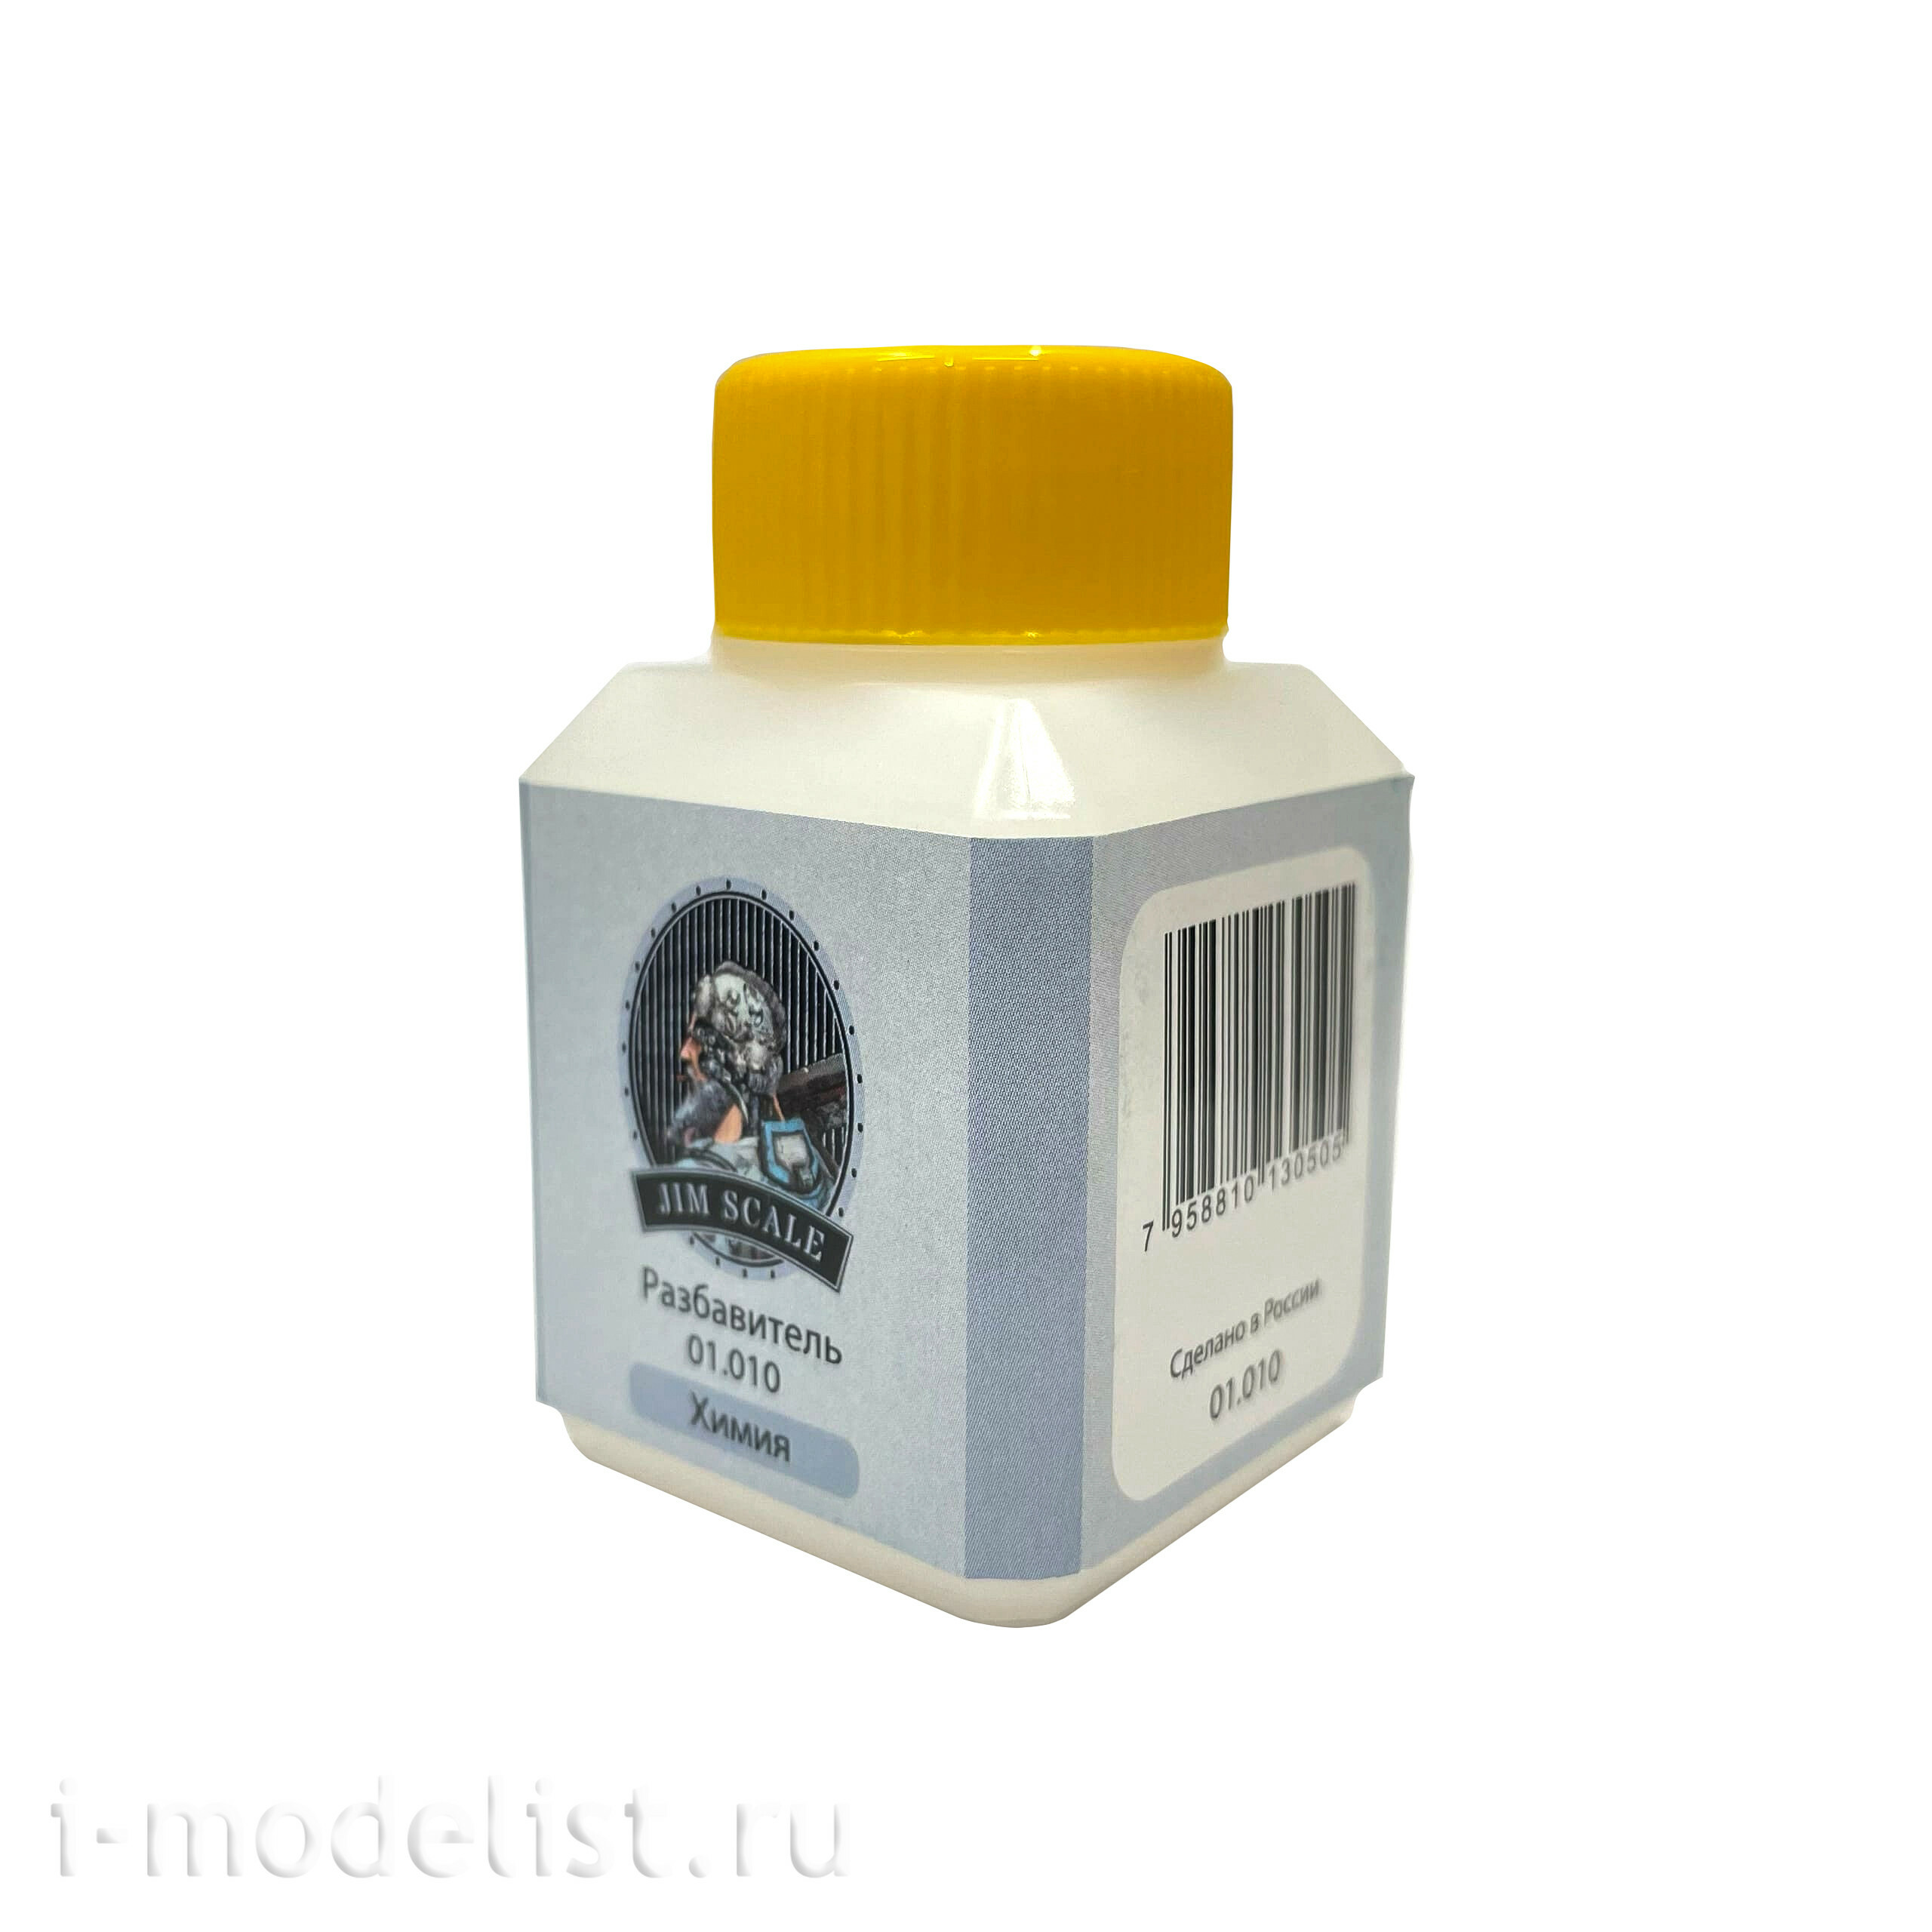 01.010 Jim Scale Diluent, 50 ml.